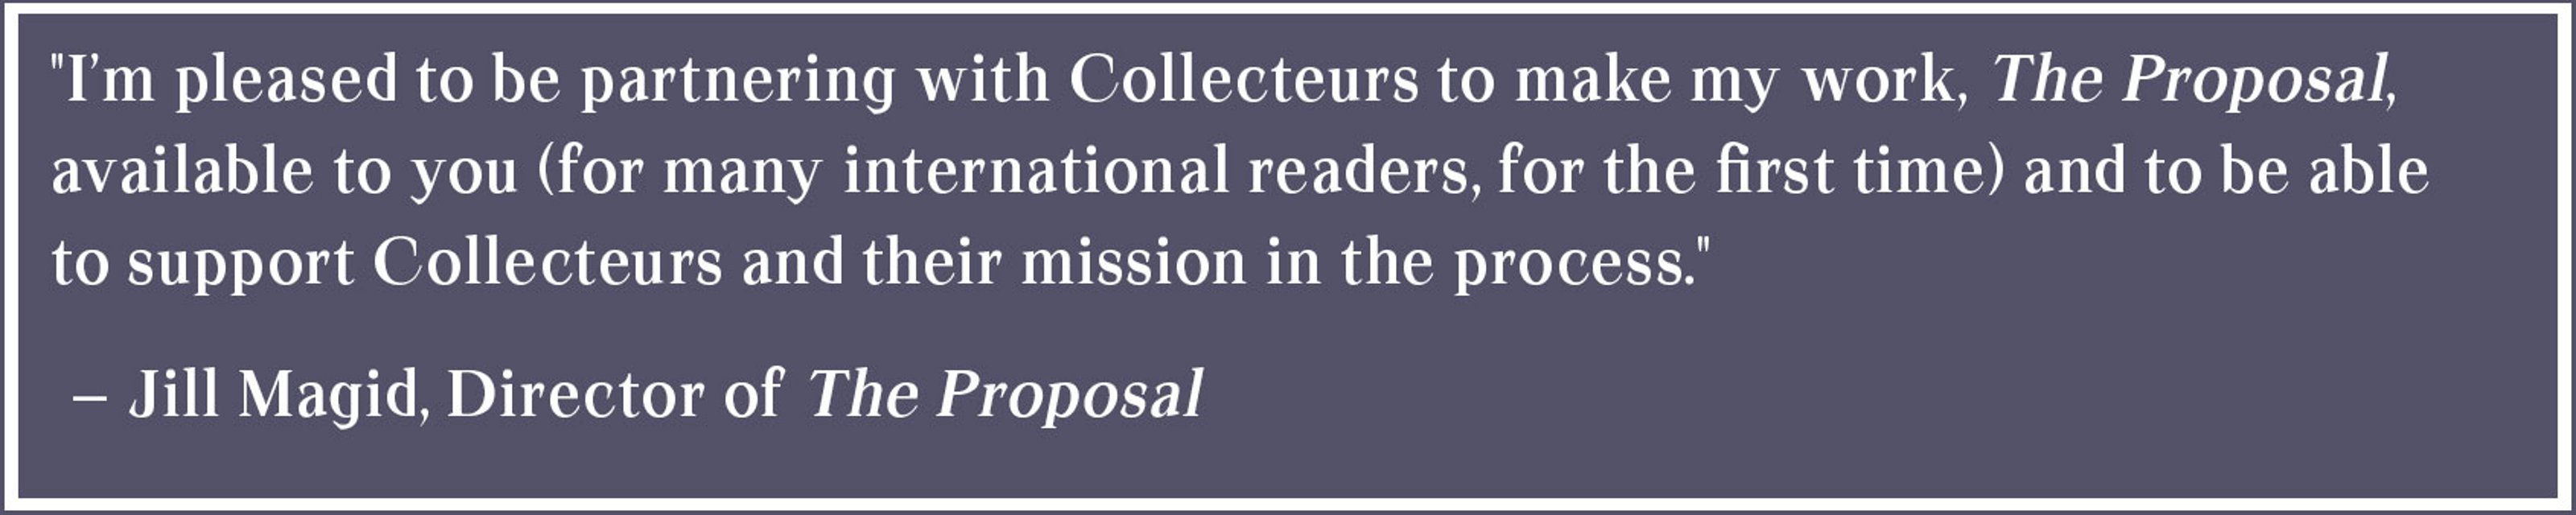 Artist Statement: I’m pleased to be partnering with Collecteurs to make my work, The Proposal, available to you (for many international readers, for the first time) and to be able to support Collecteurs and their mission in the process.” -- Jill Magid, Director of The Proposal